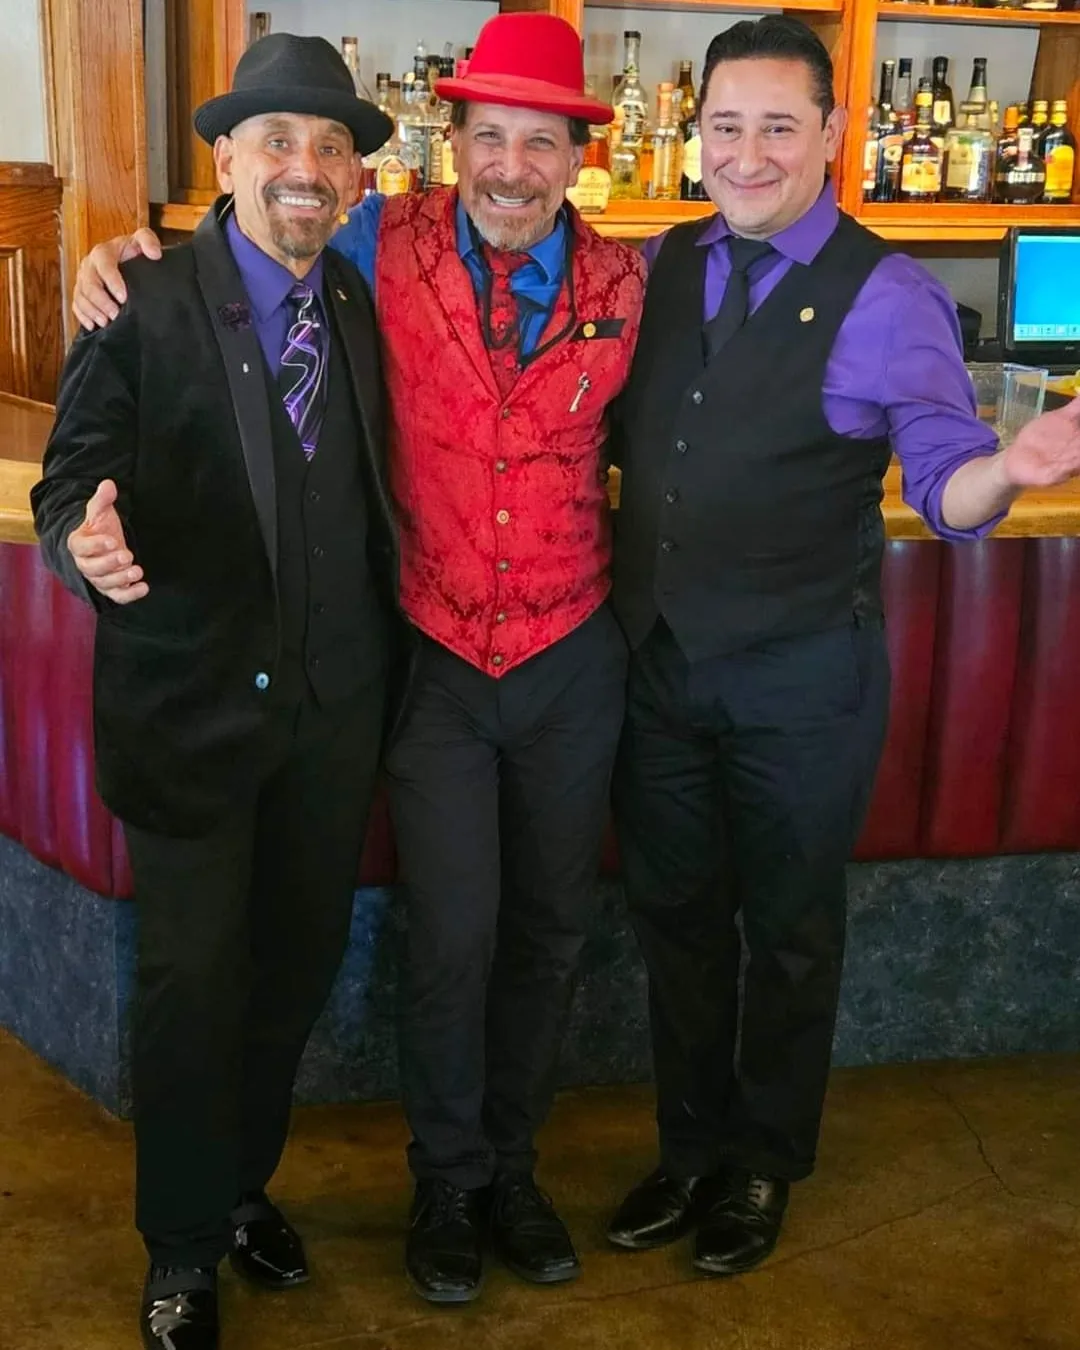 Magicians Sharpo, Raven & Migz pose at the bar for Enchantment & Magic Dinner Show at Le Chene om July 14th, 2023.  